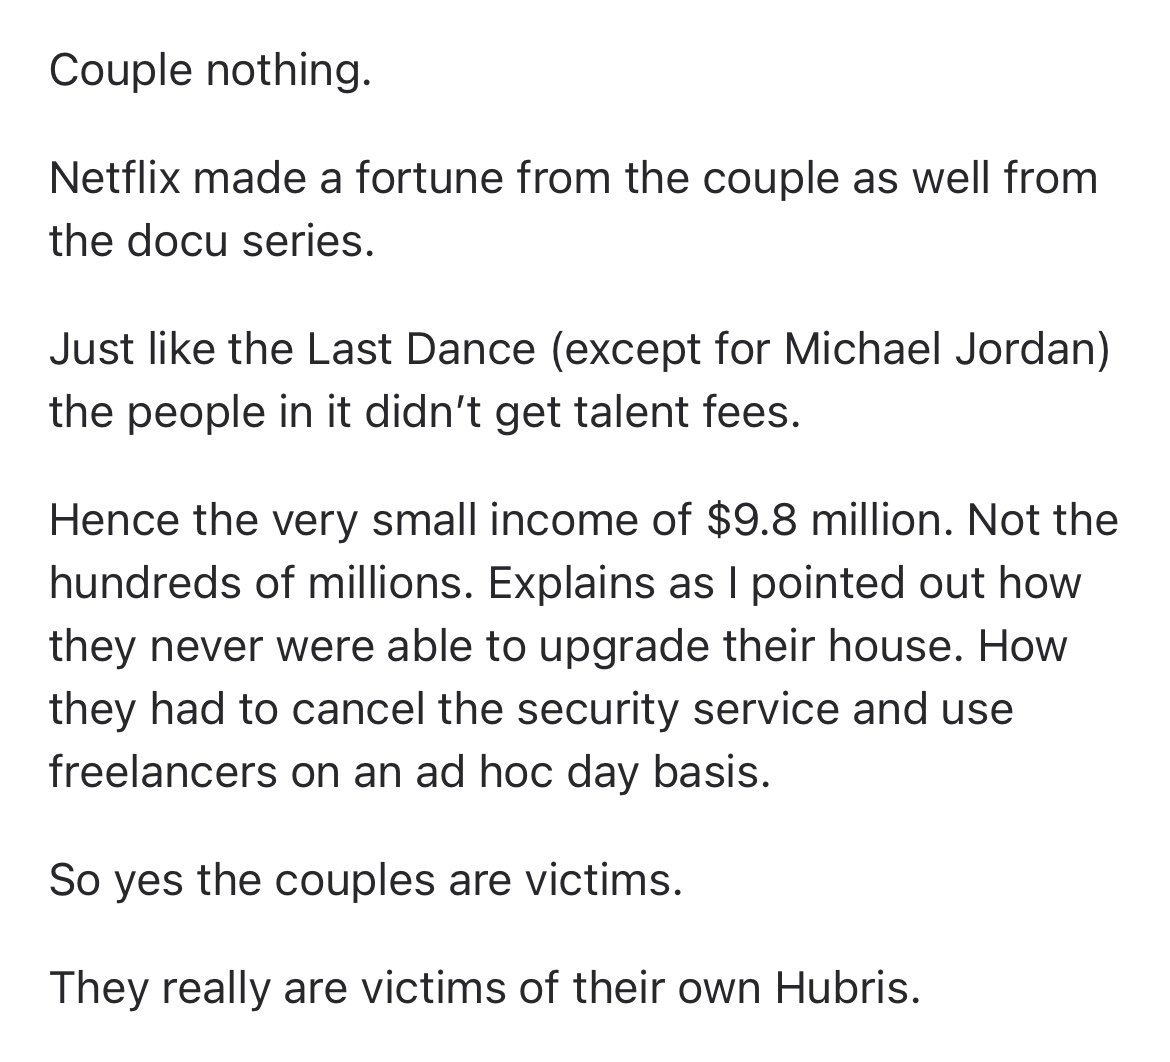 Harry’s wife is a stupid businesswoman. Netflix made a lot of money and only gave her a fraction back. Oprah and their lawyer made bank off of them. They got taken to the cleaners from the sharks in the industry and they did not notice.